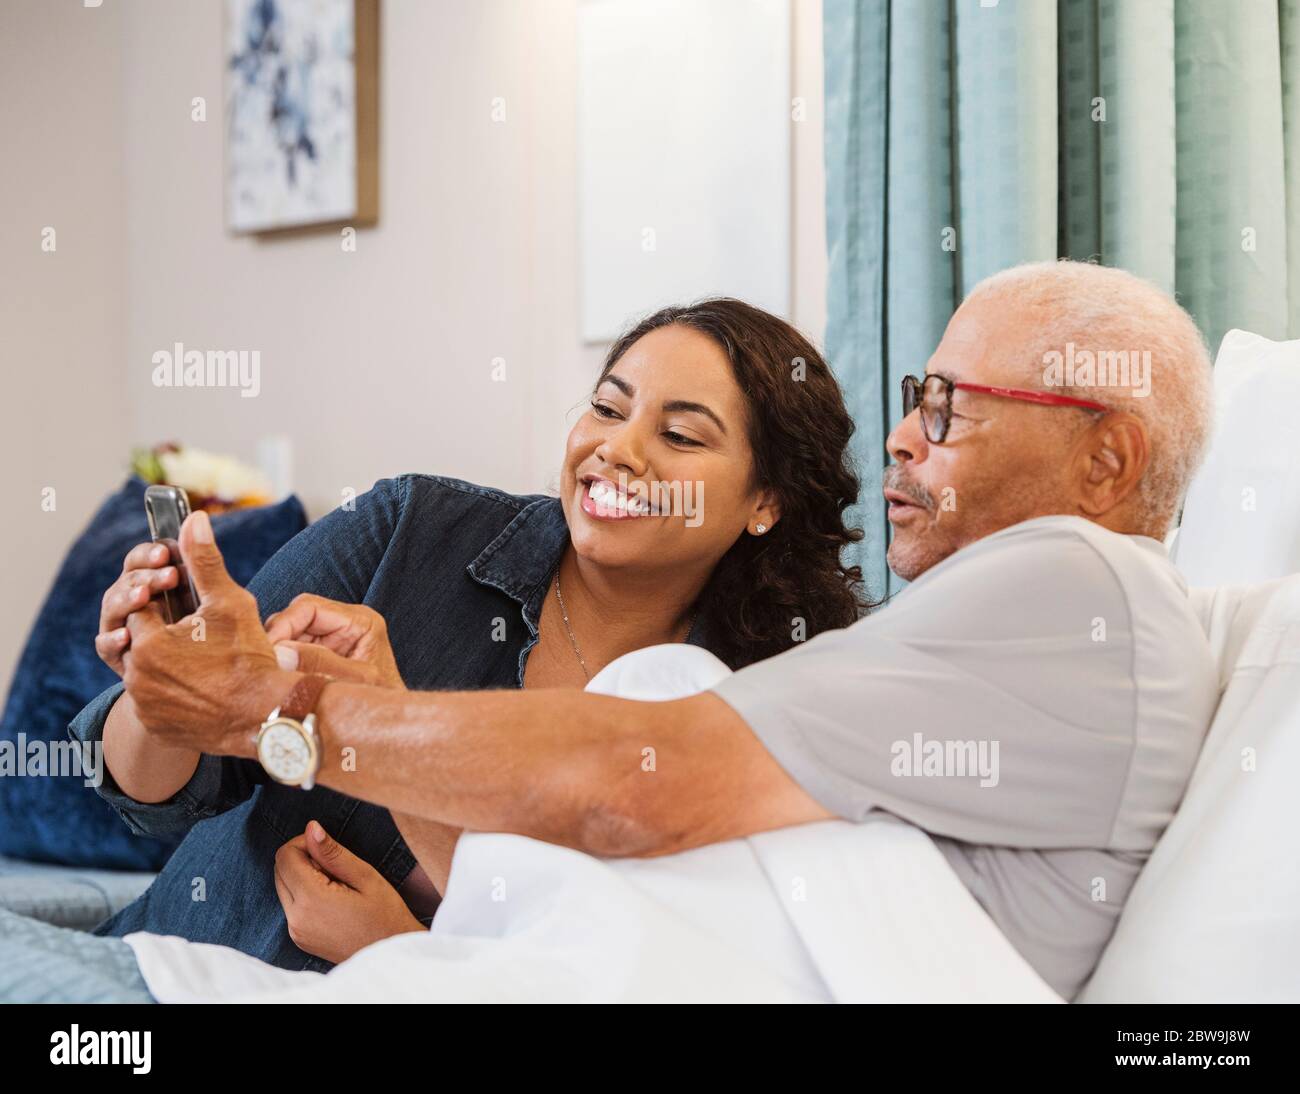 Father and daughter taking selfie in nursing home Stock Photo